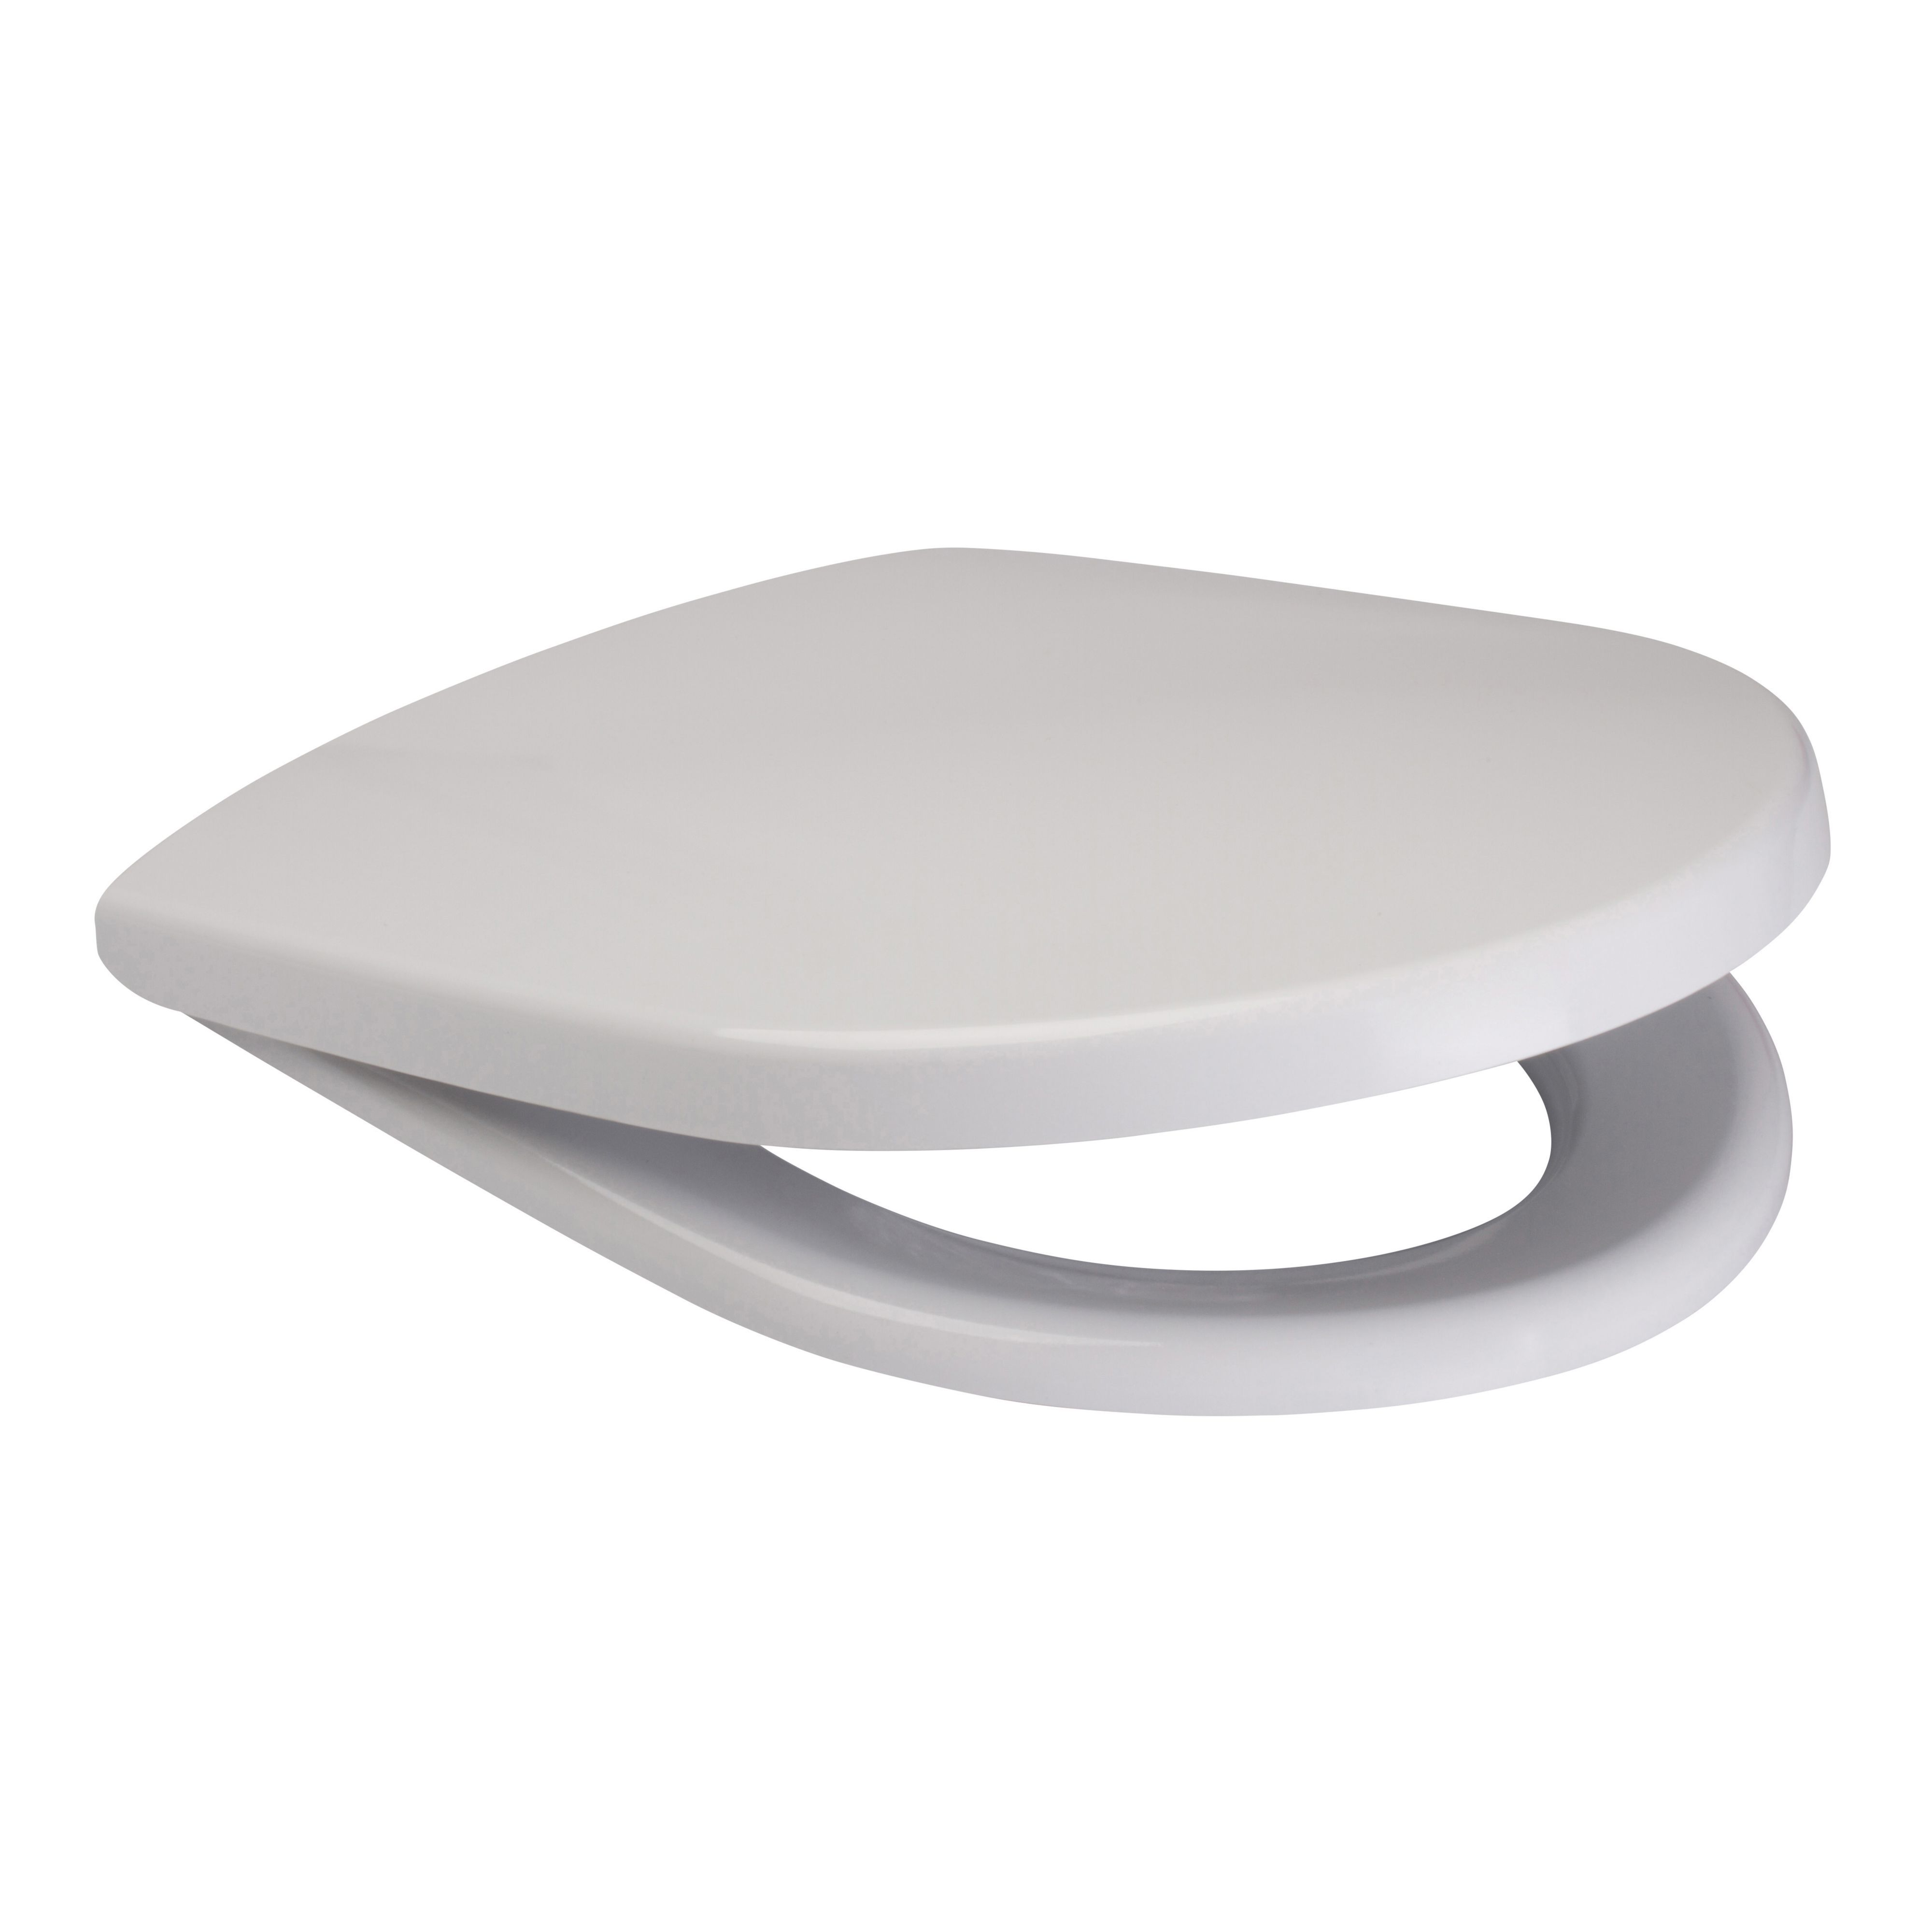 Cooke & Lewis Luciana White Toilet Seat | Departments | DIY at B&Q